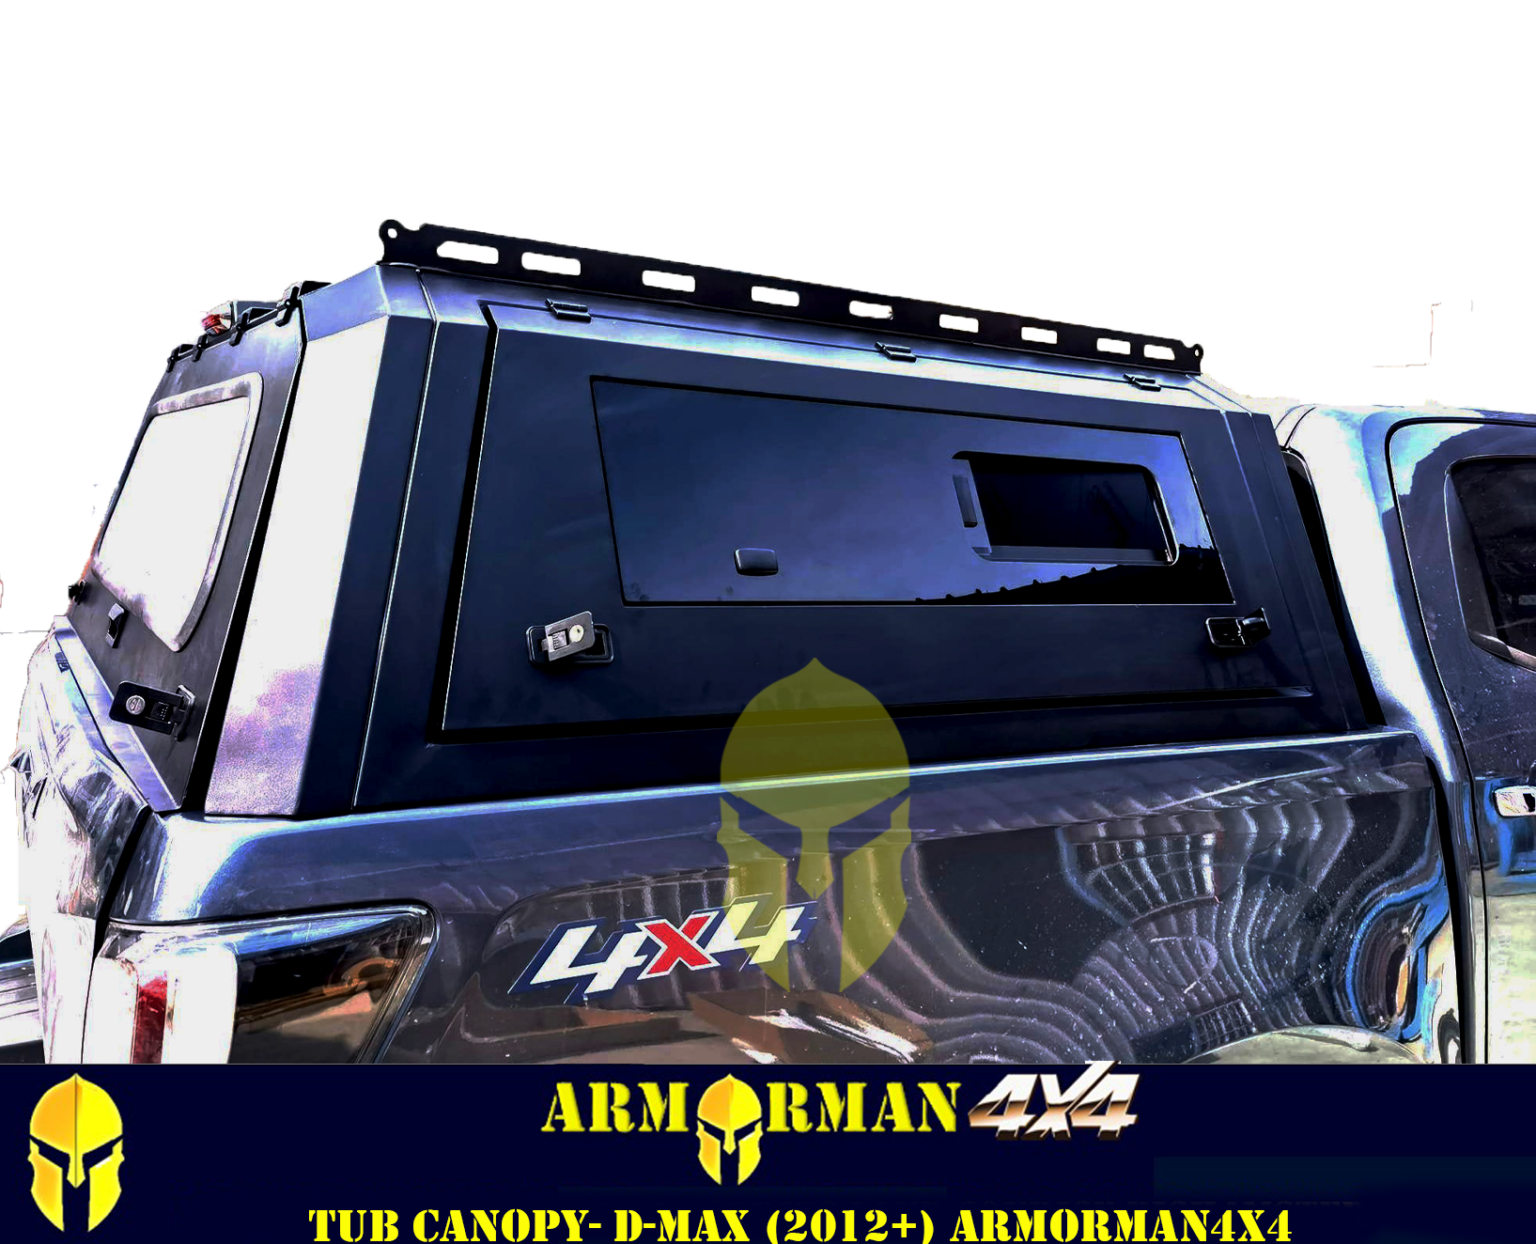 Slide Side Tub Canopy Archives - Armorman 4x4